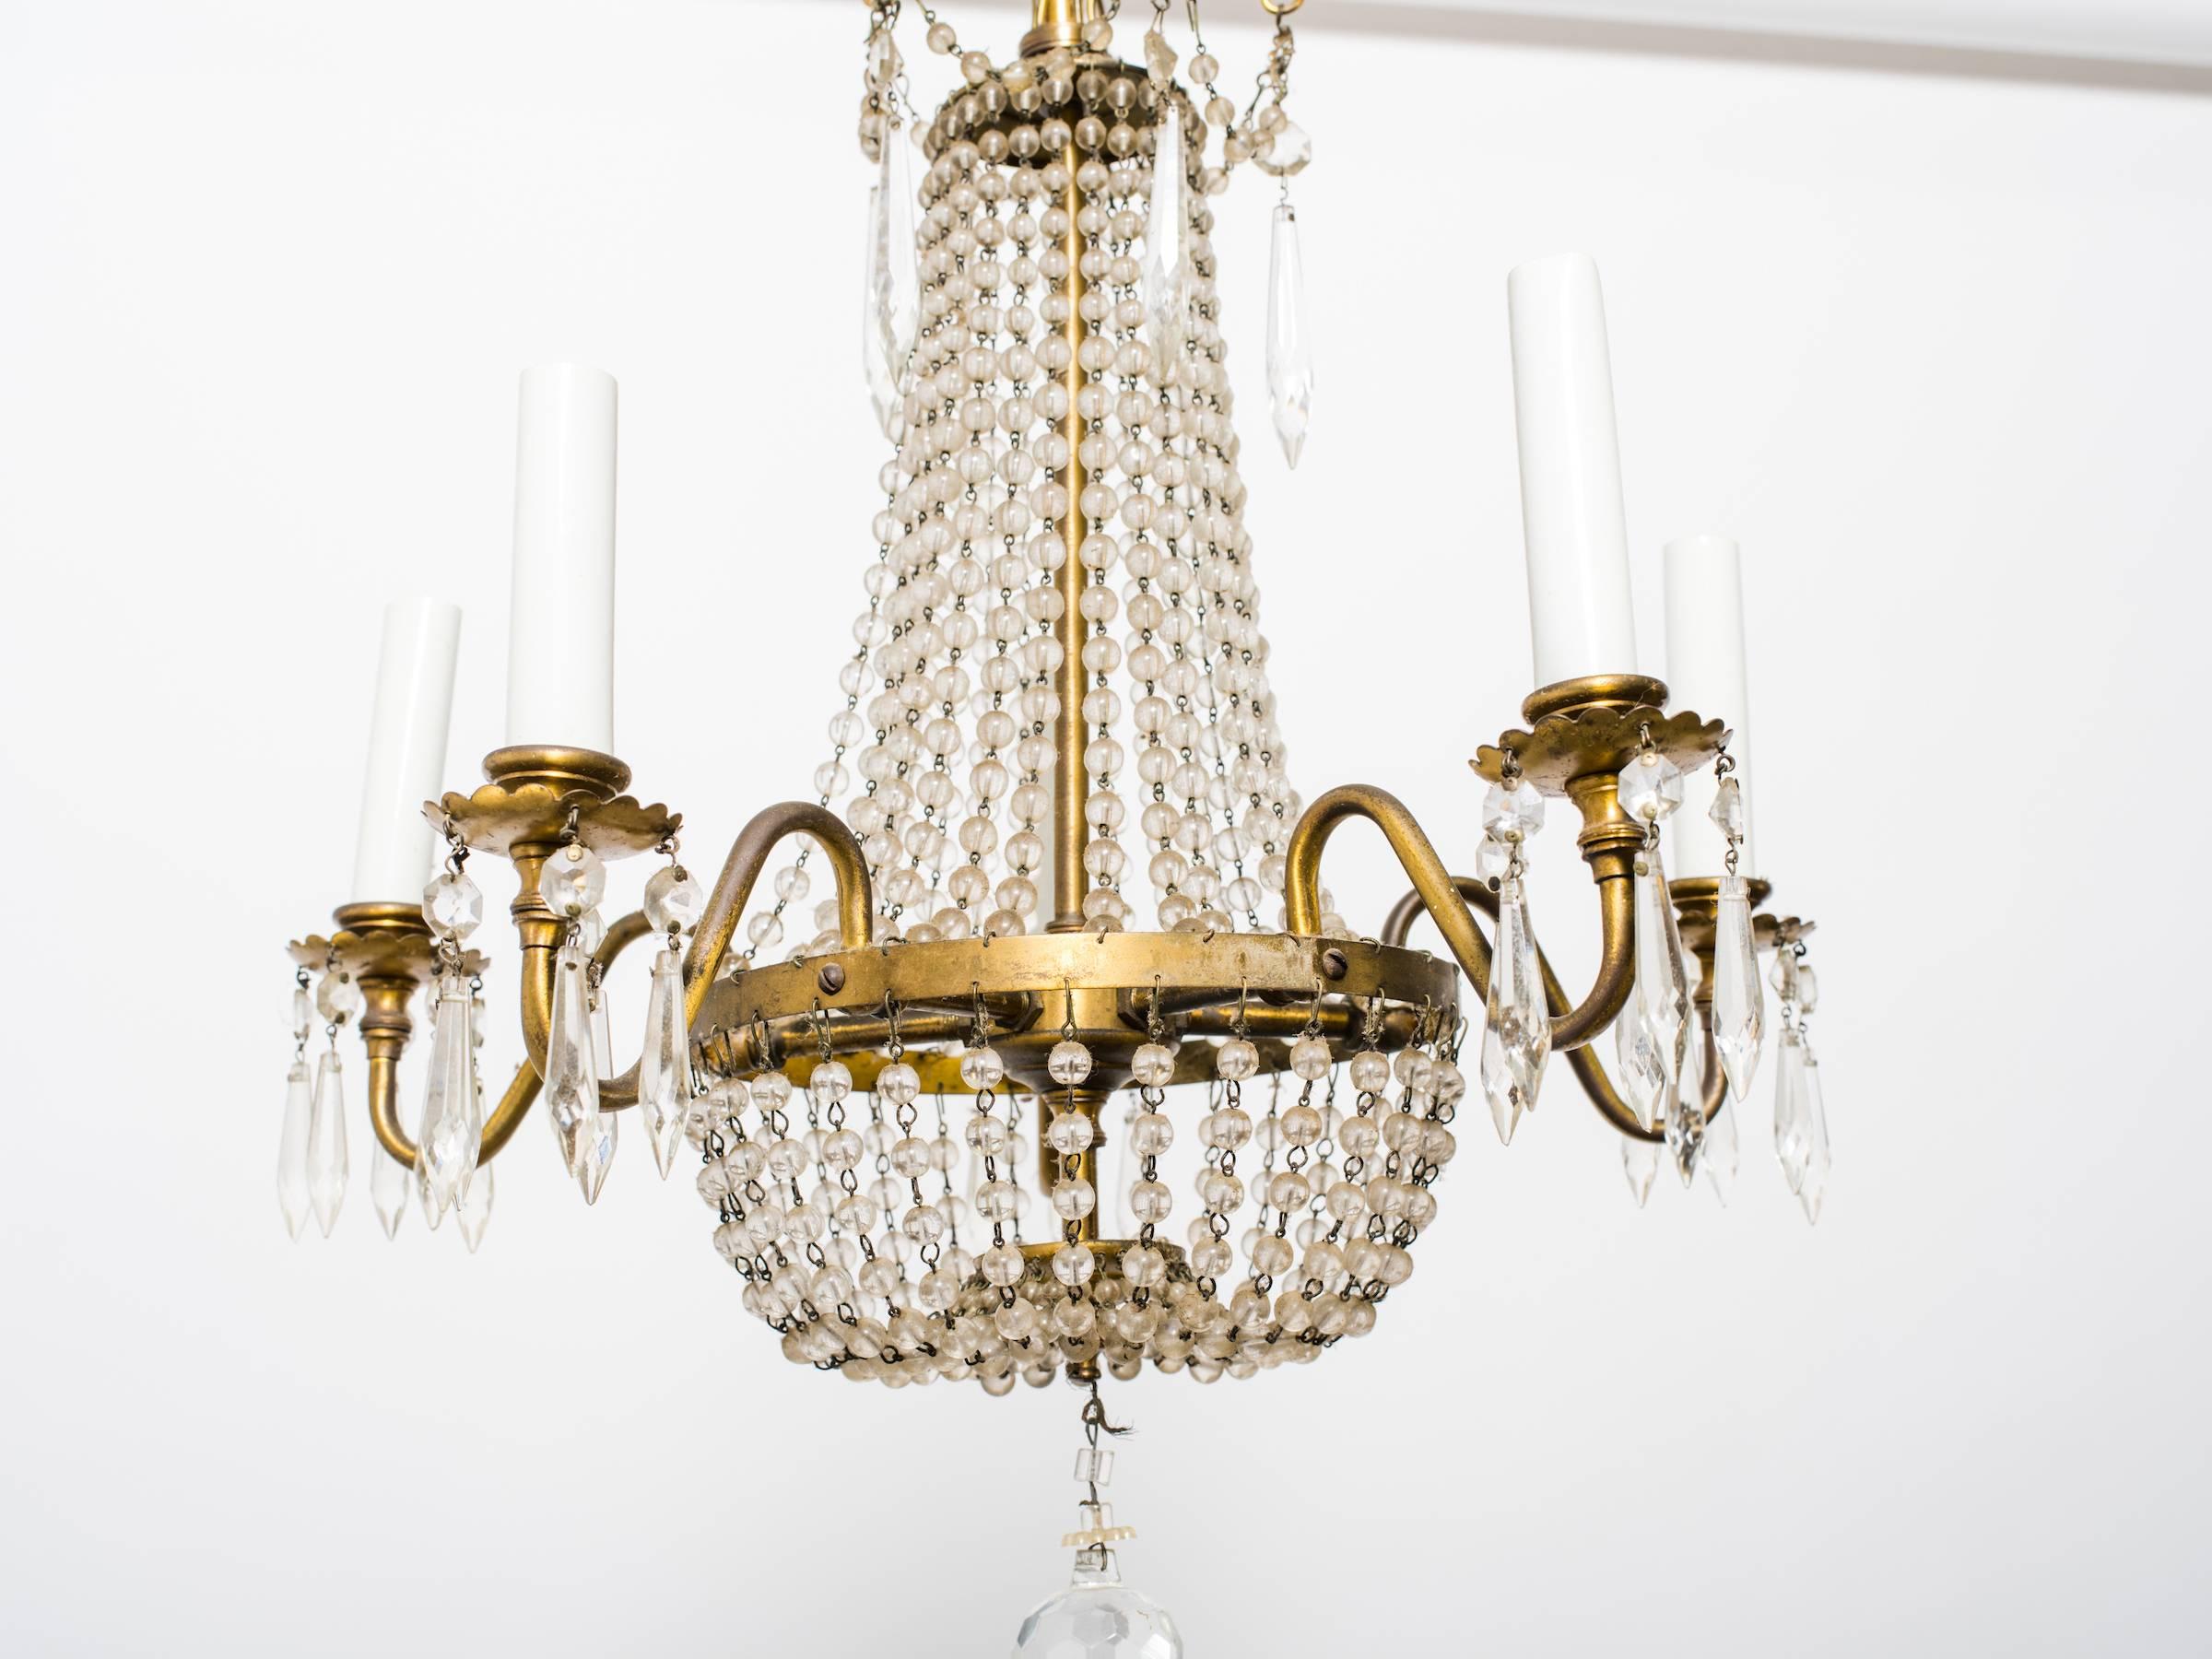 1950s French brass  beaded chandelier from the Ritz Carlton in NYC.